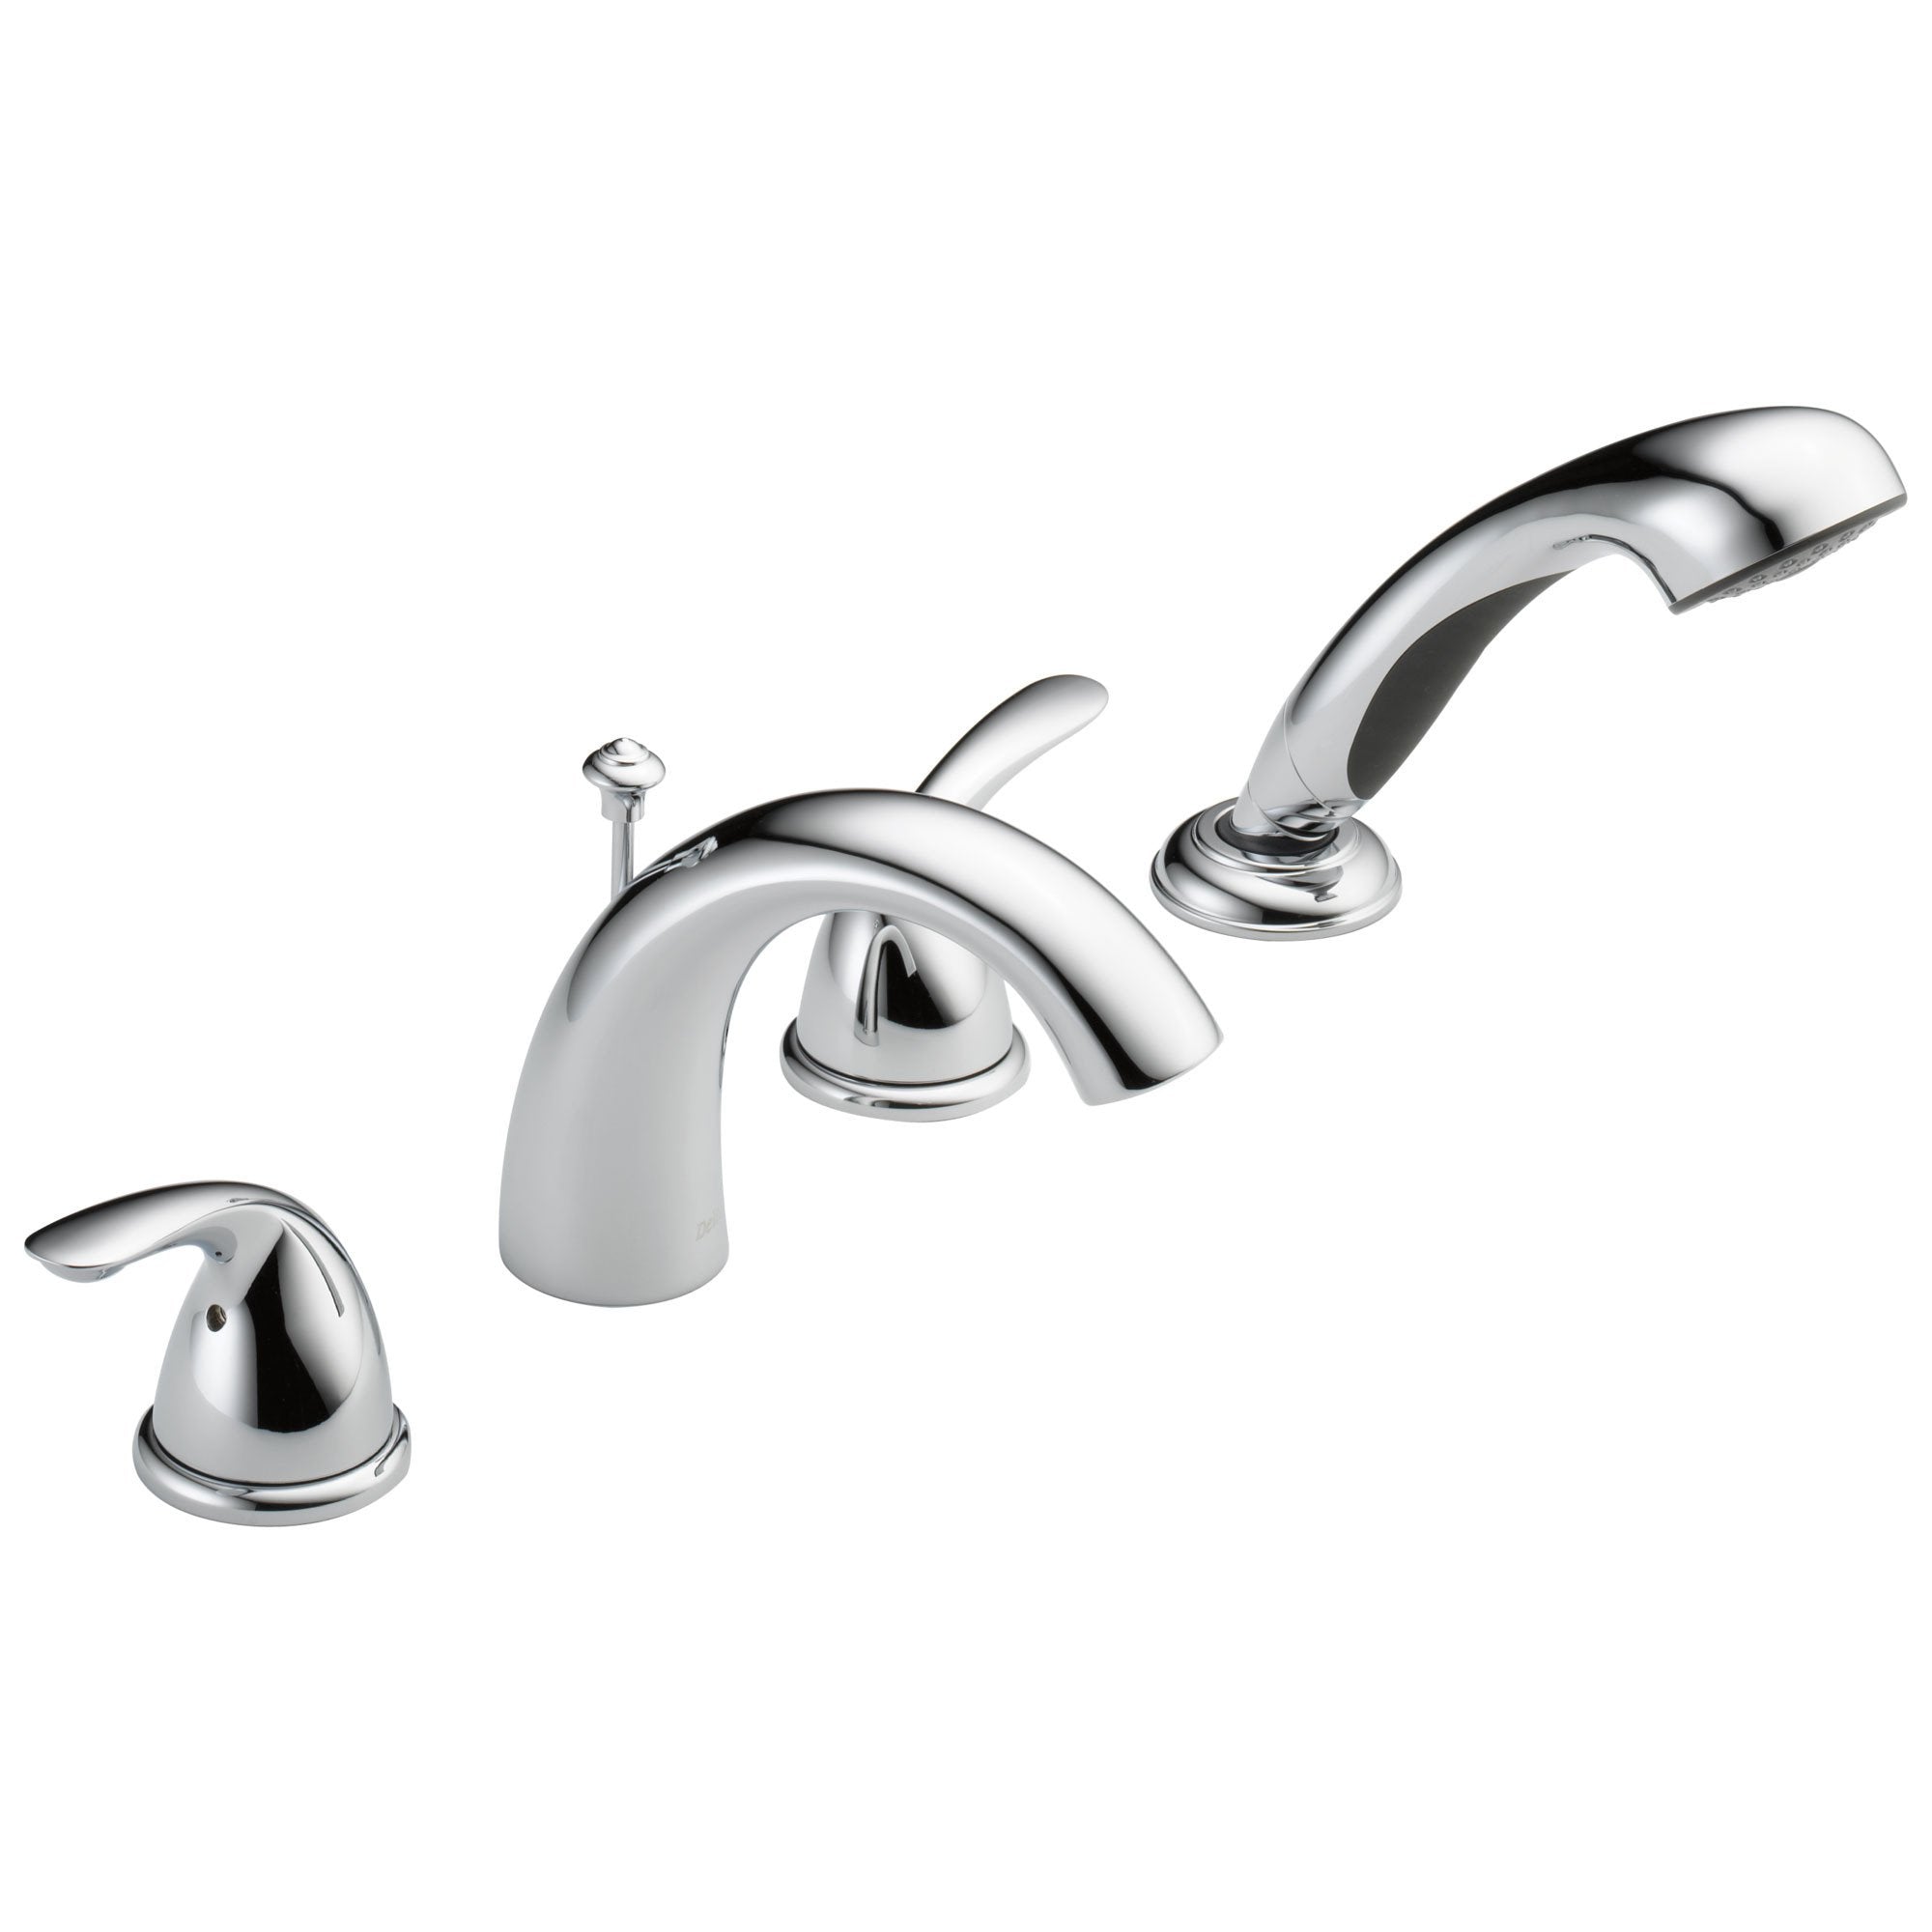 Delta Chrome Finish Classic Style Roman Tub Filler with Hand Spray Trim Kit (Requires Rough-in Valve) DT470525